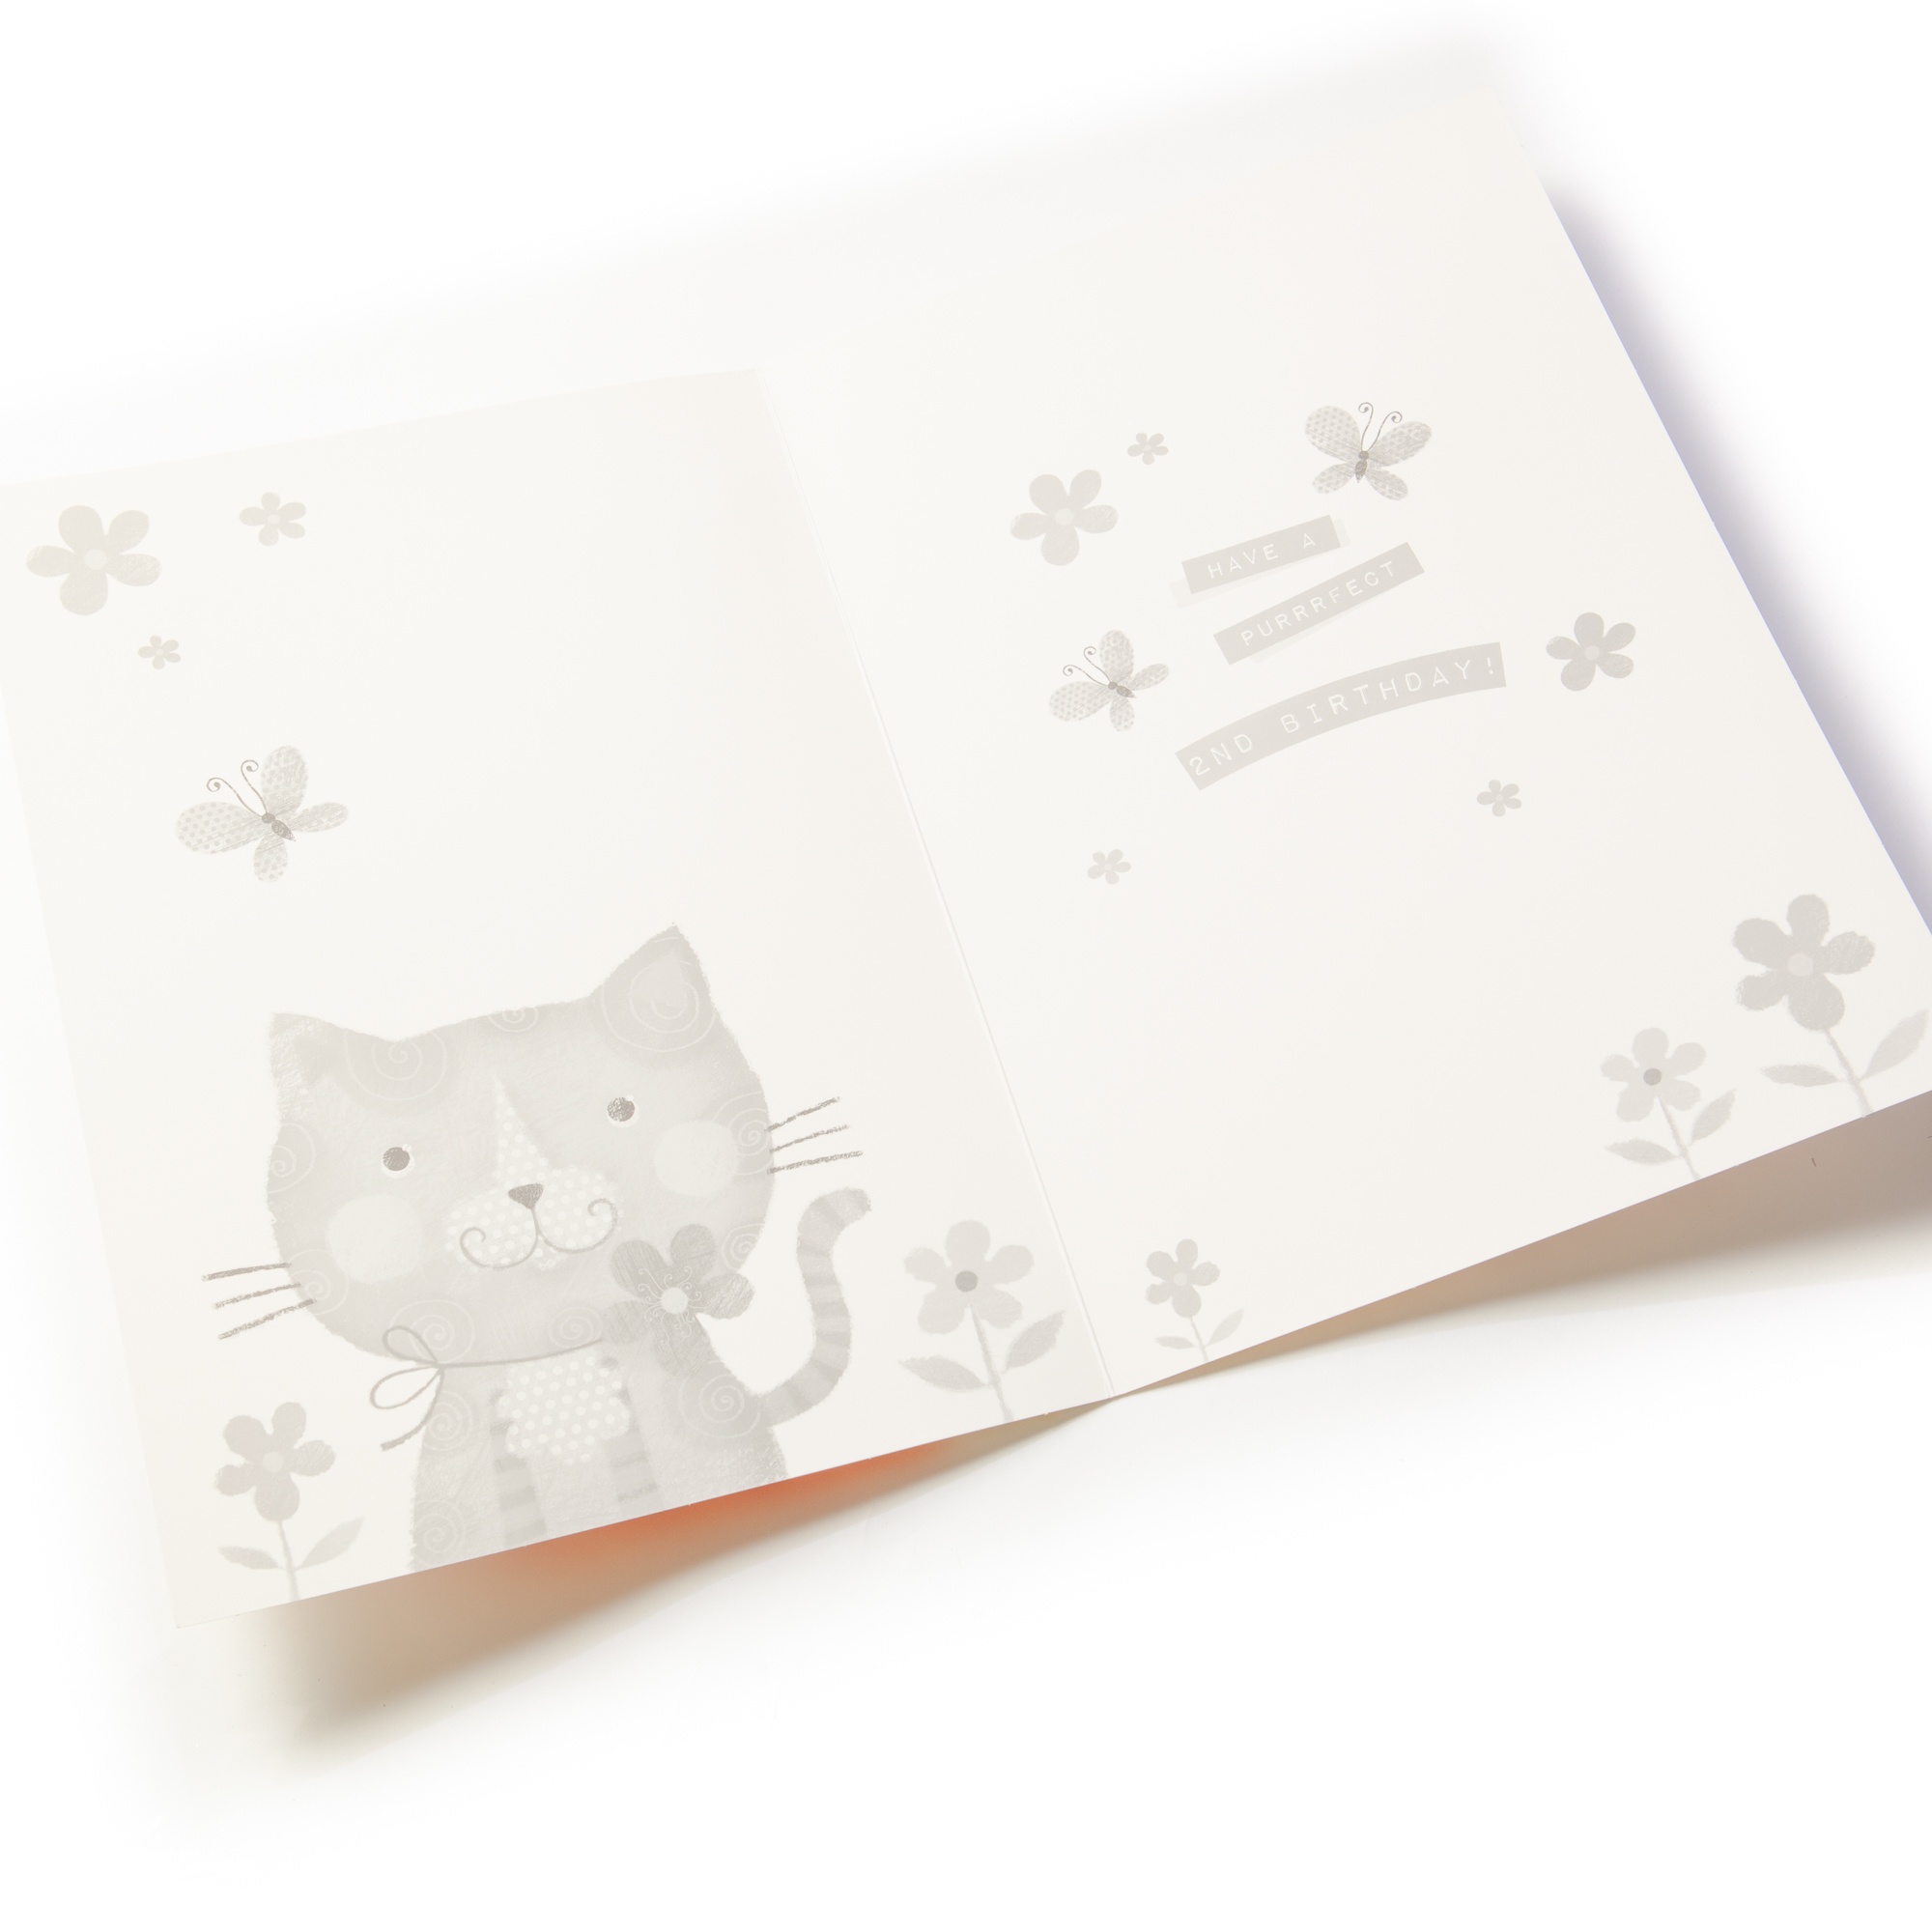 Giant 2nd Birthday Card - Kitty & Flowers 